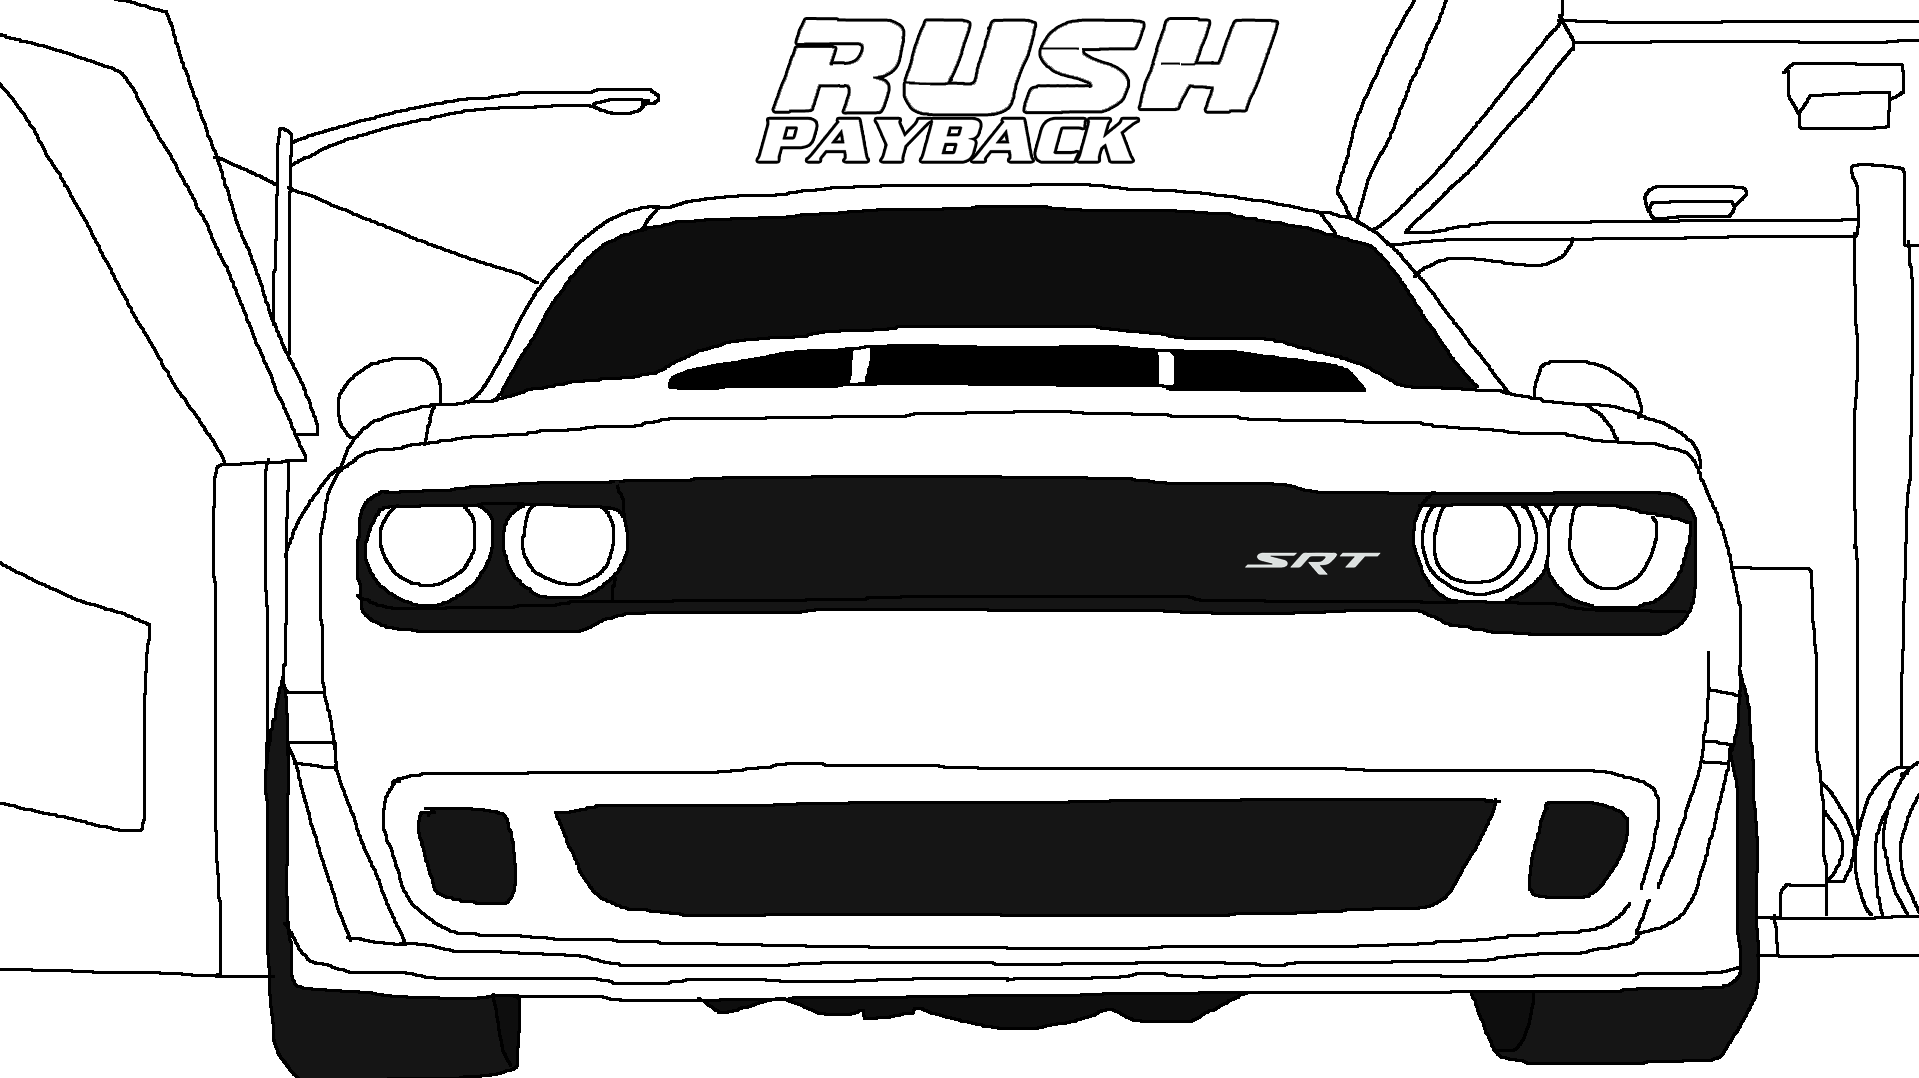 Challenger Coloring Pages